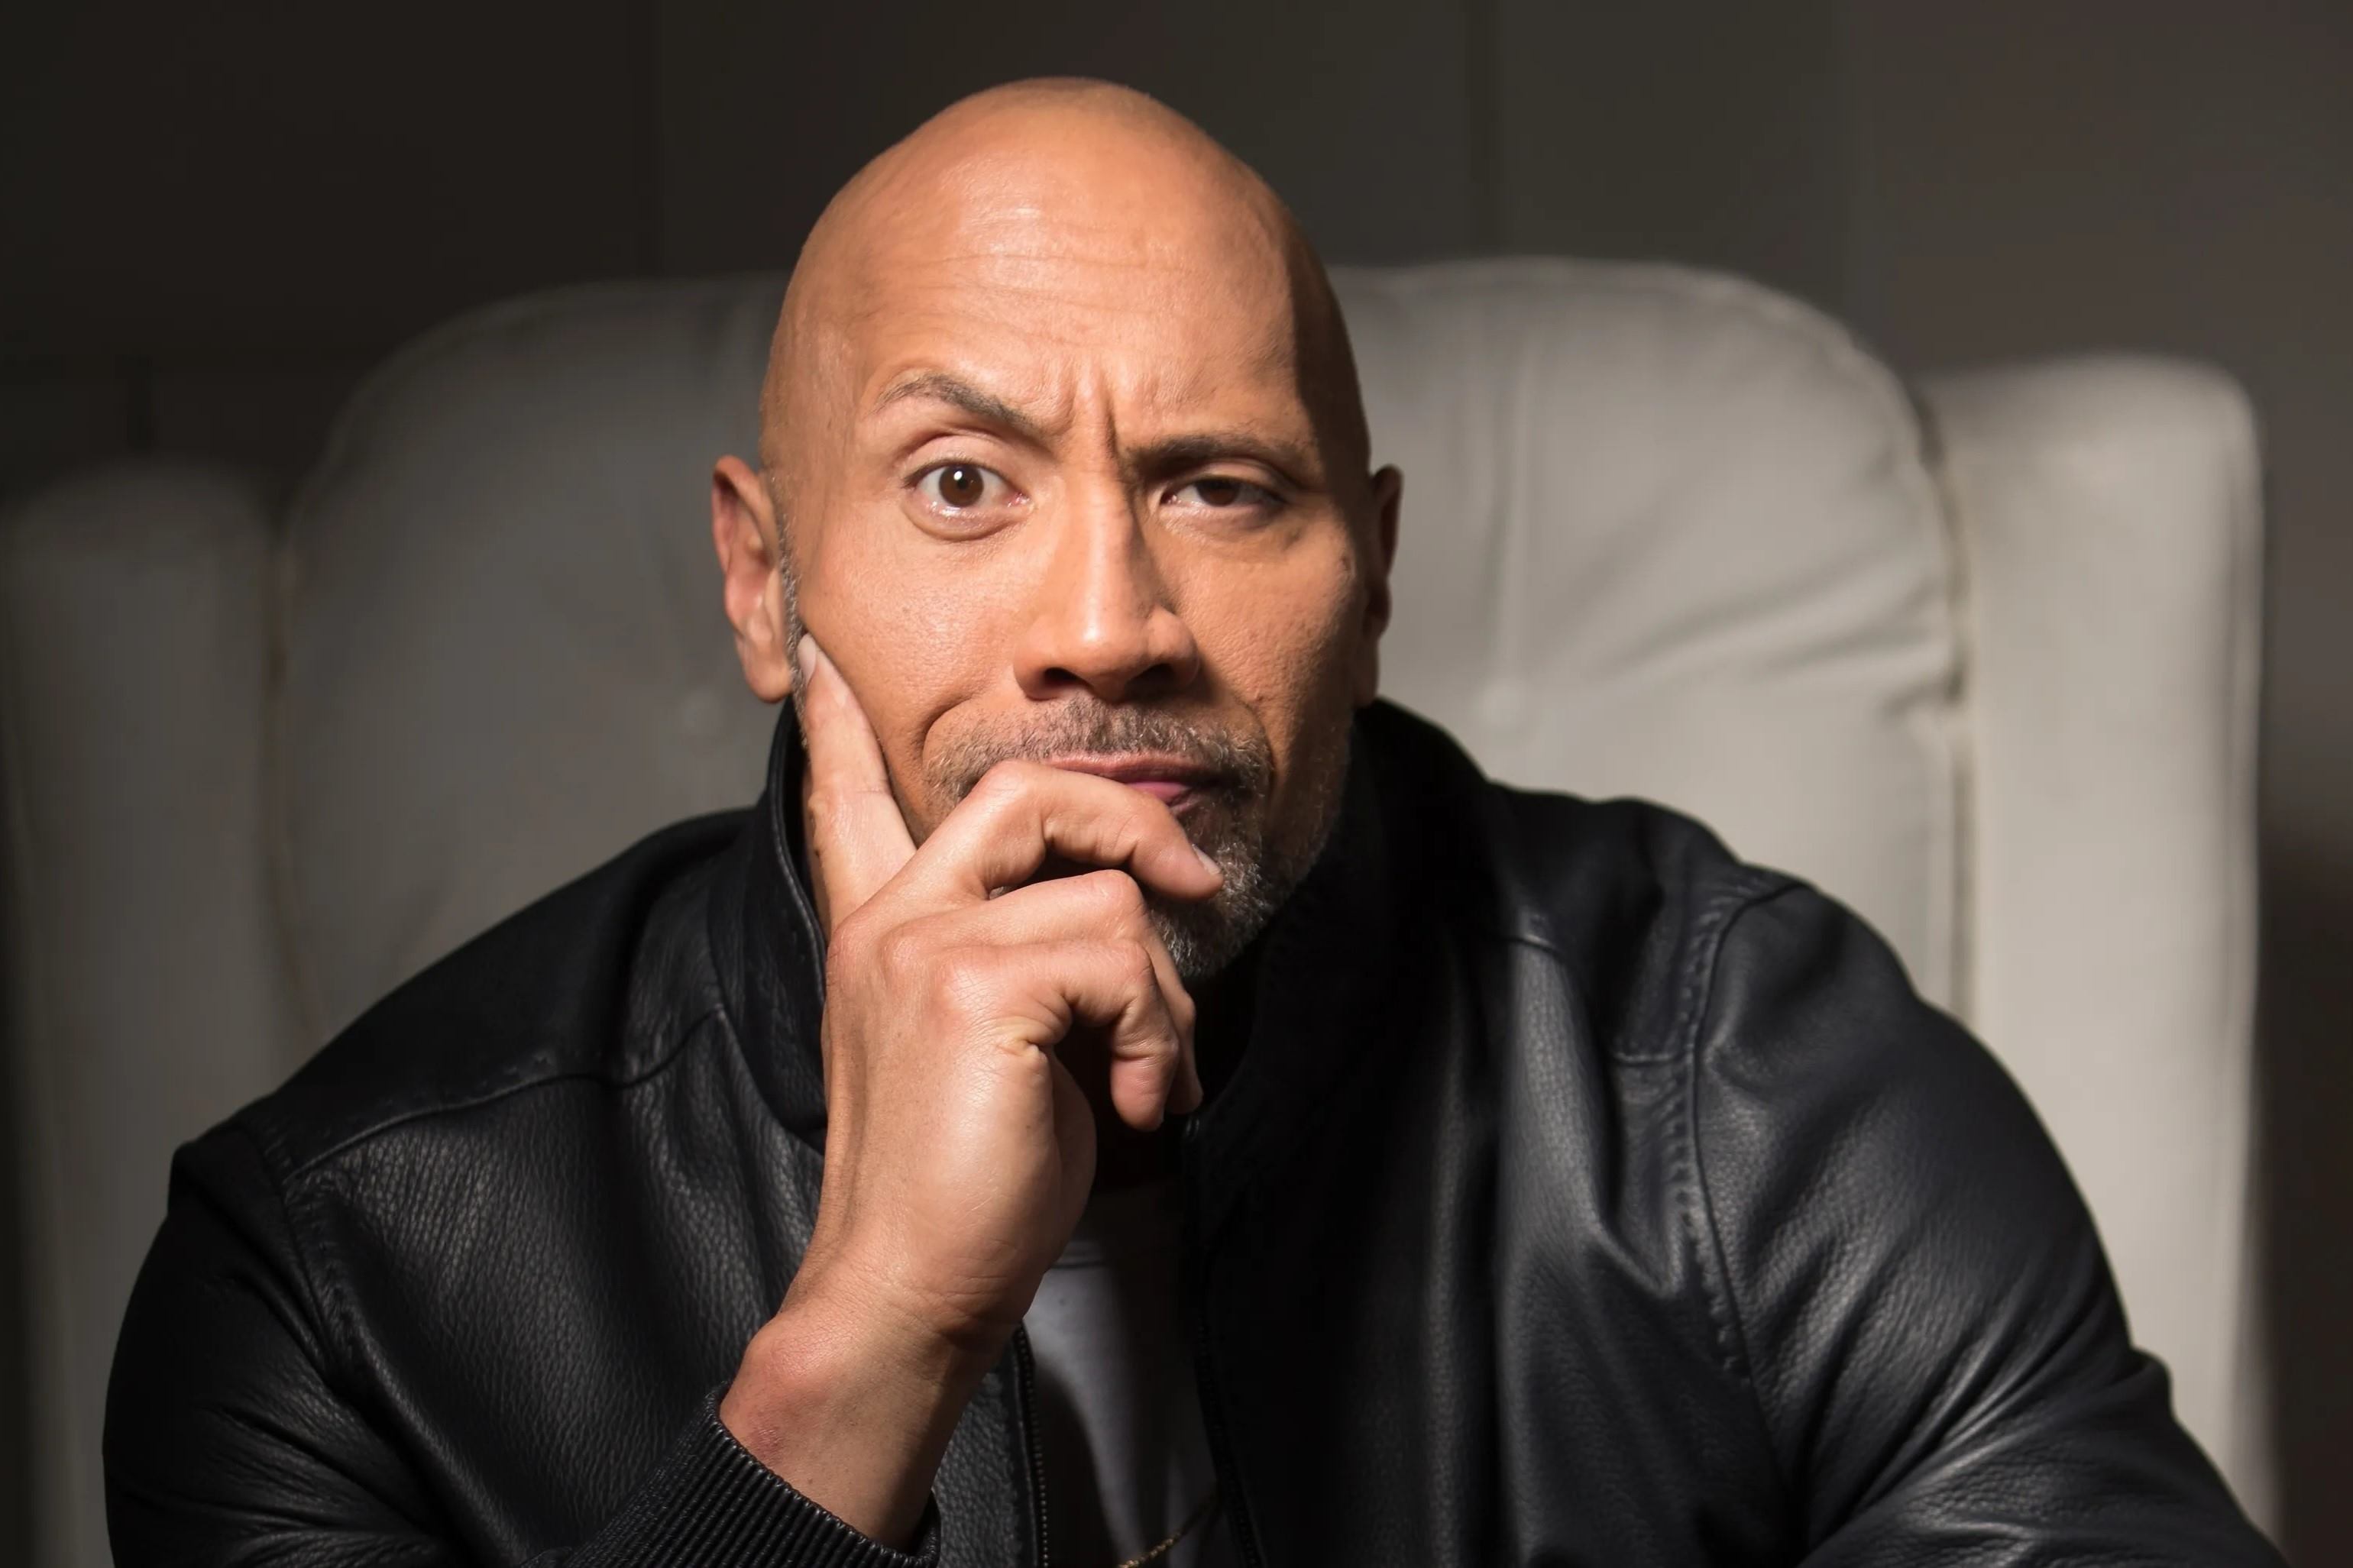 The Rock's Iconic Eyebrow Raise: The Ultimate Gesture Revealed!